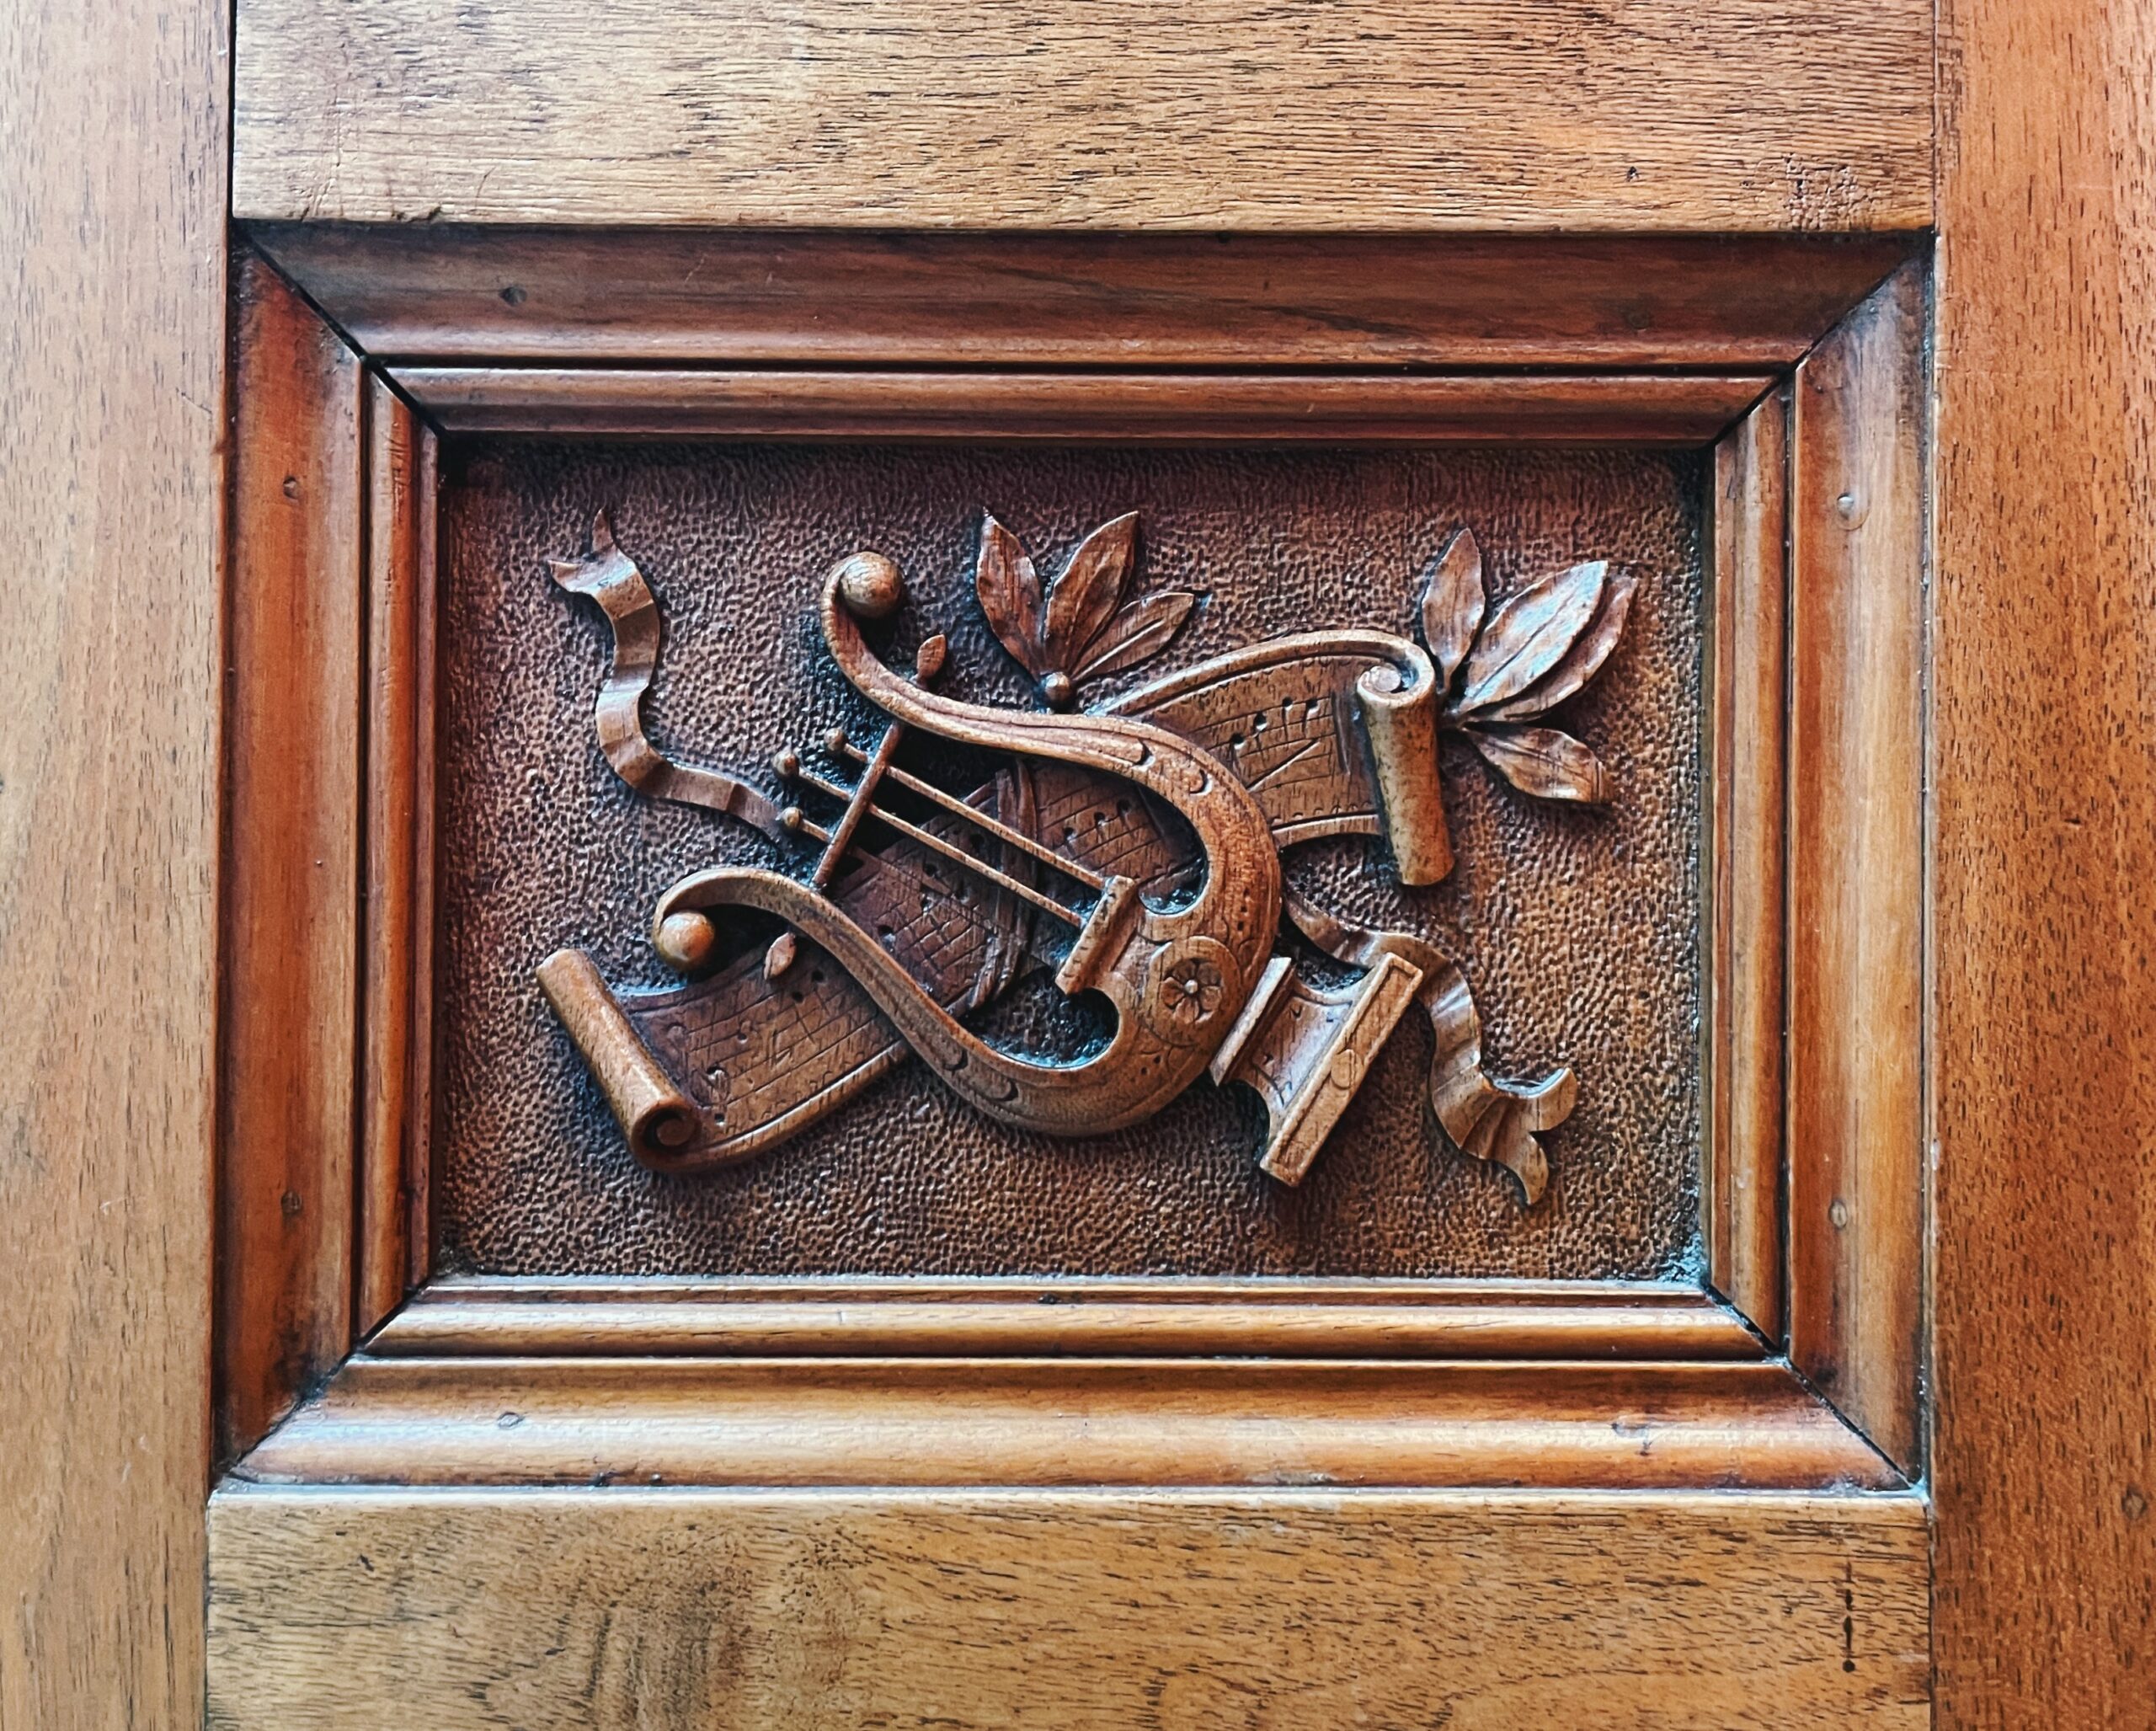 Carved wooden panel with an instrument and sheet music